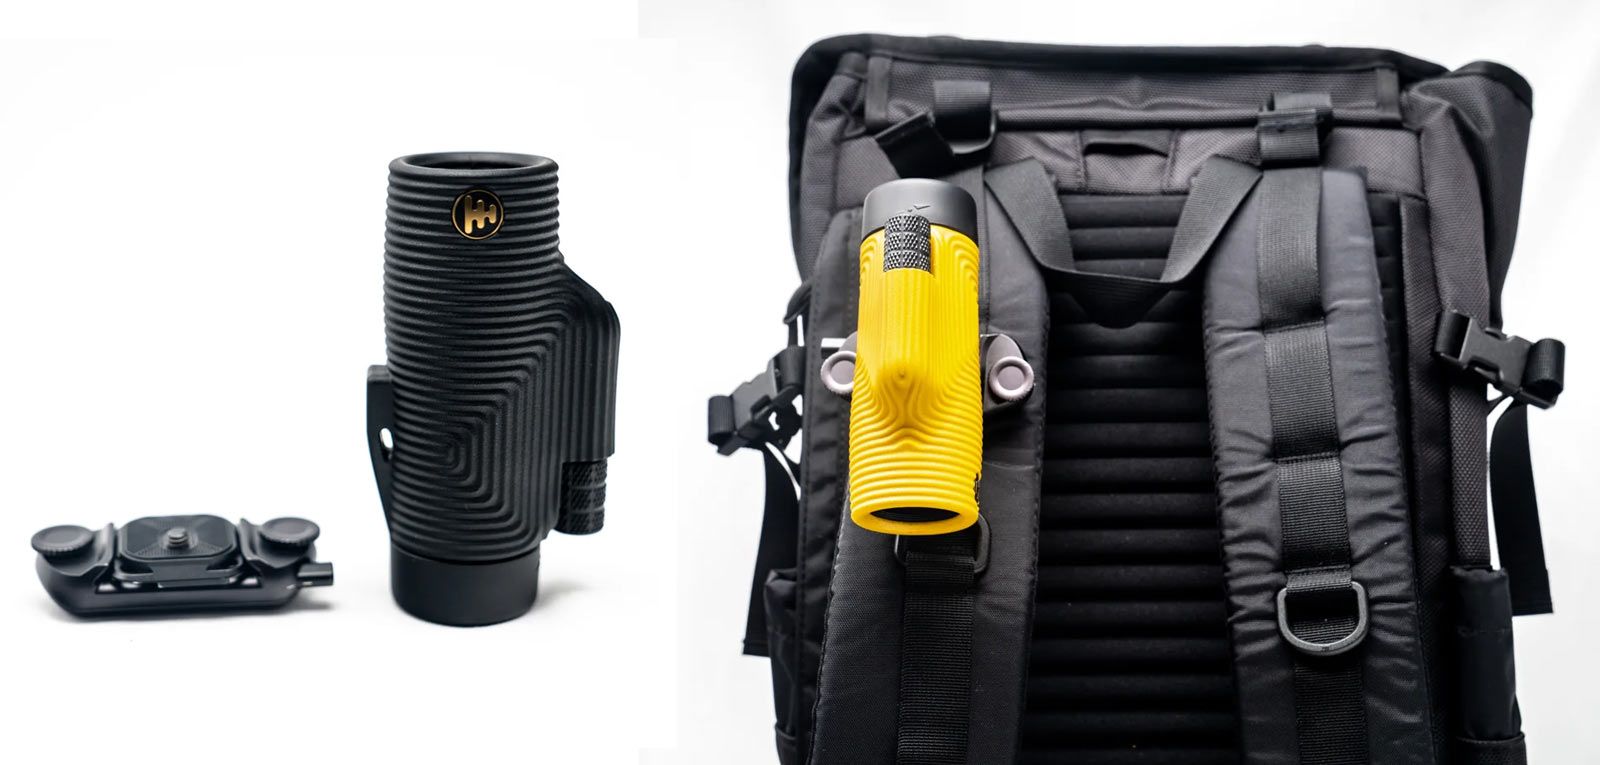 peak design backpack strap mount for nocs monocular and binoculars works the same as their camera mounting system